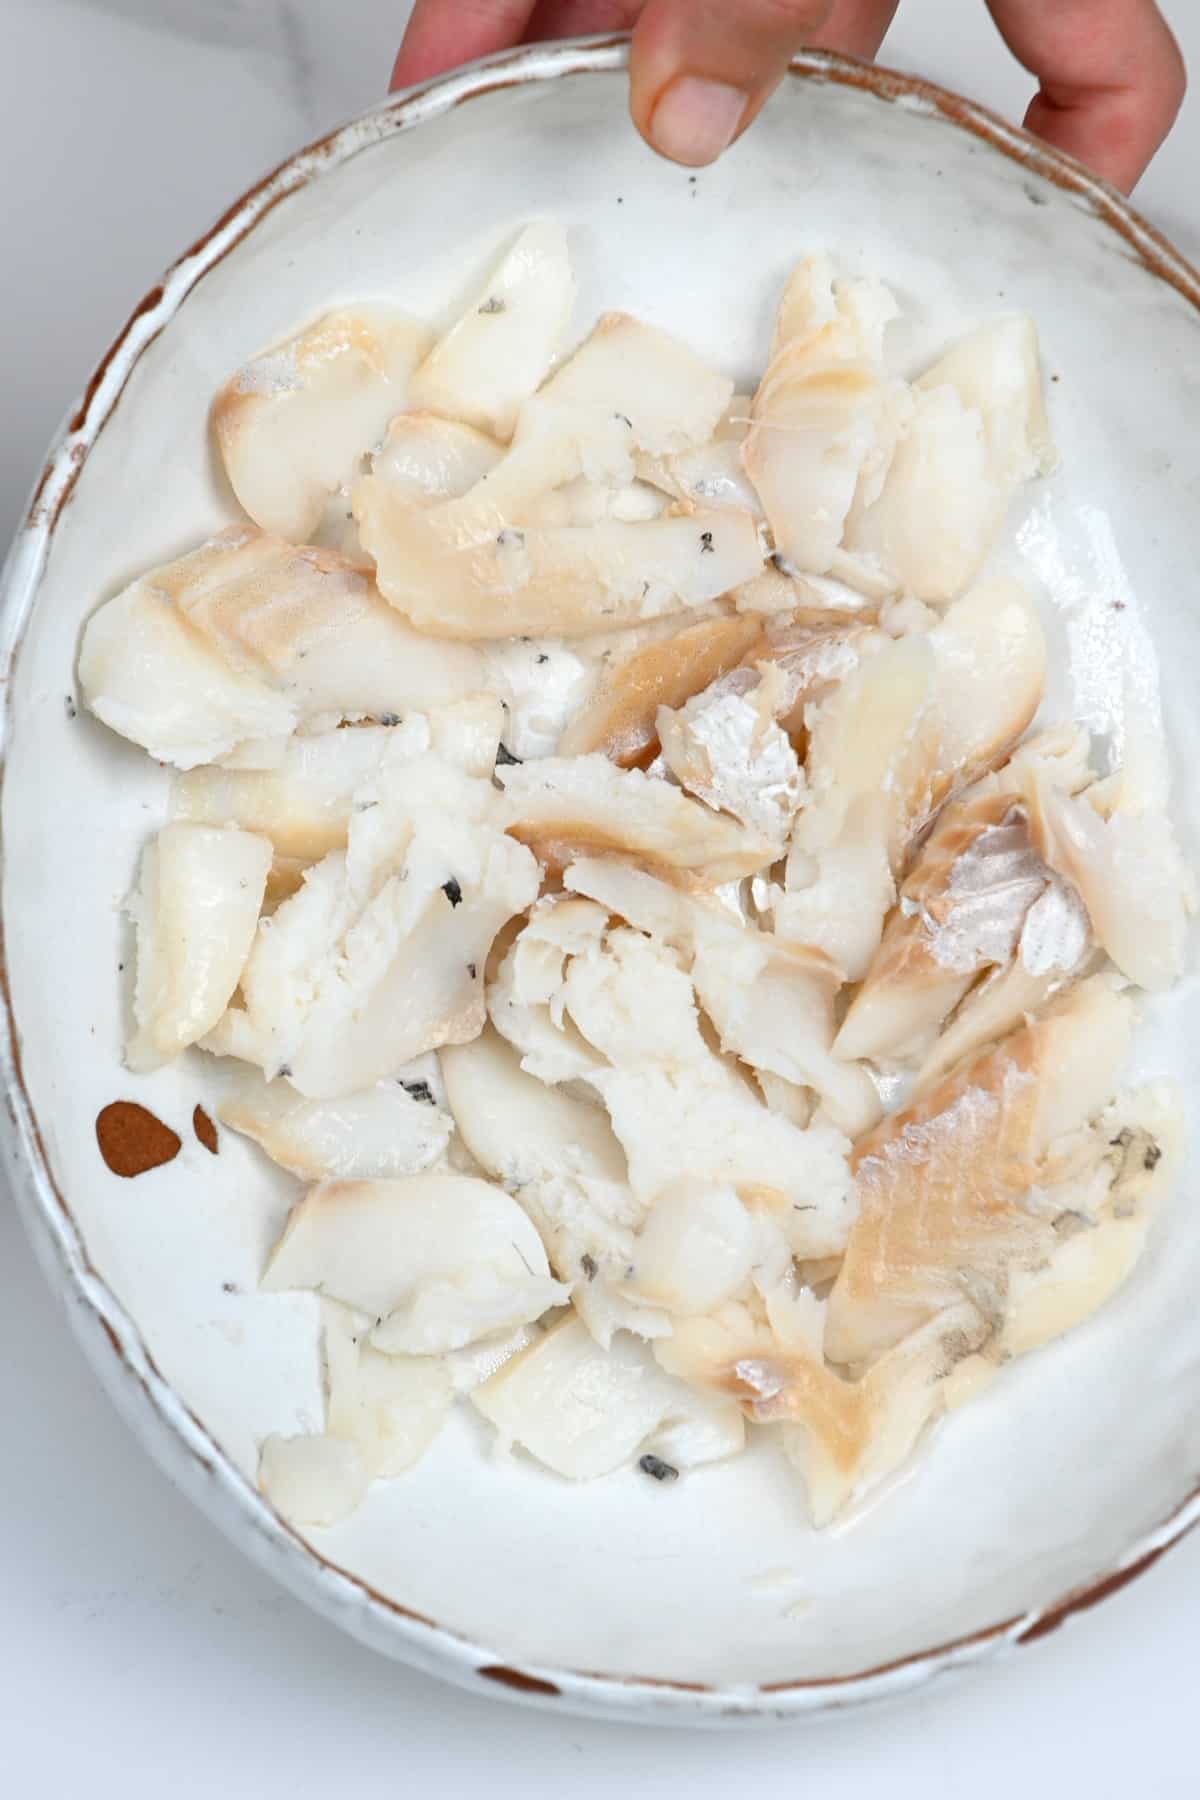 Cooked salted cod fish in a bowl